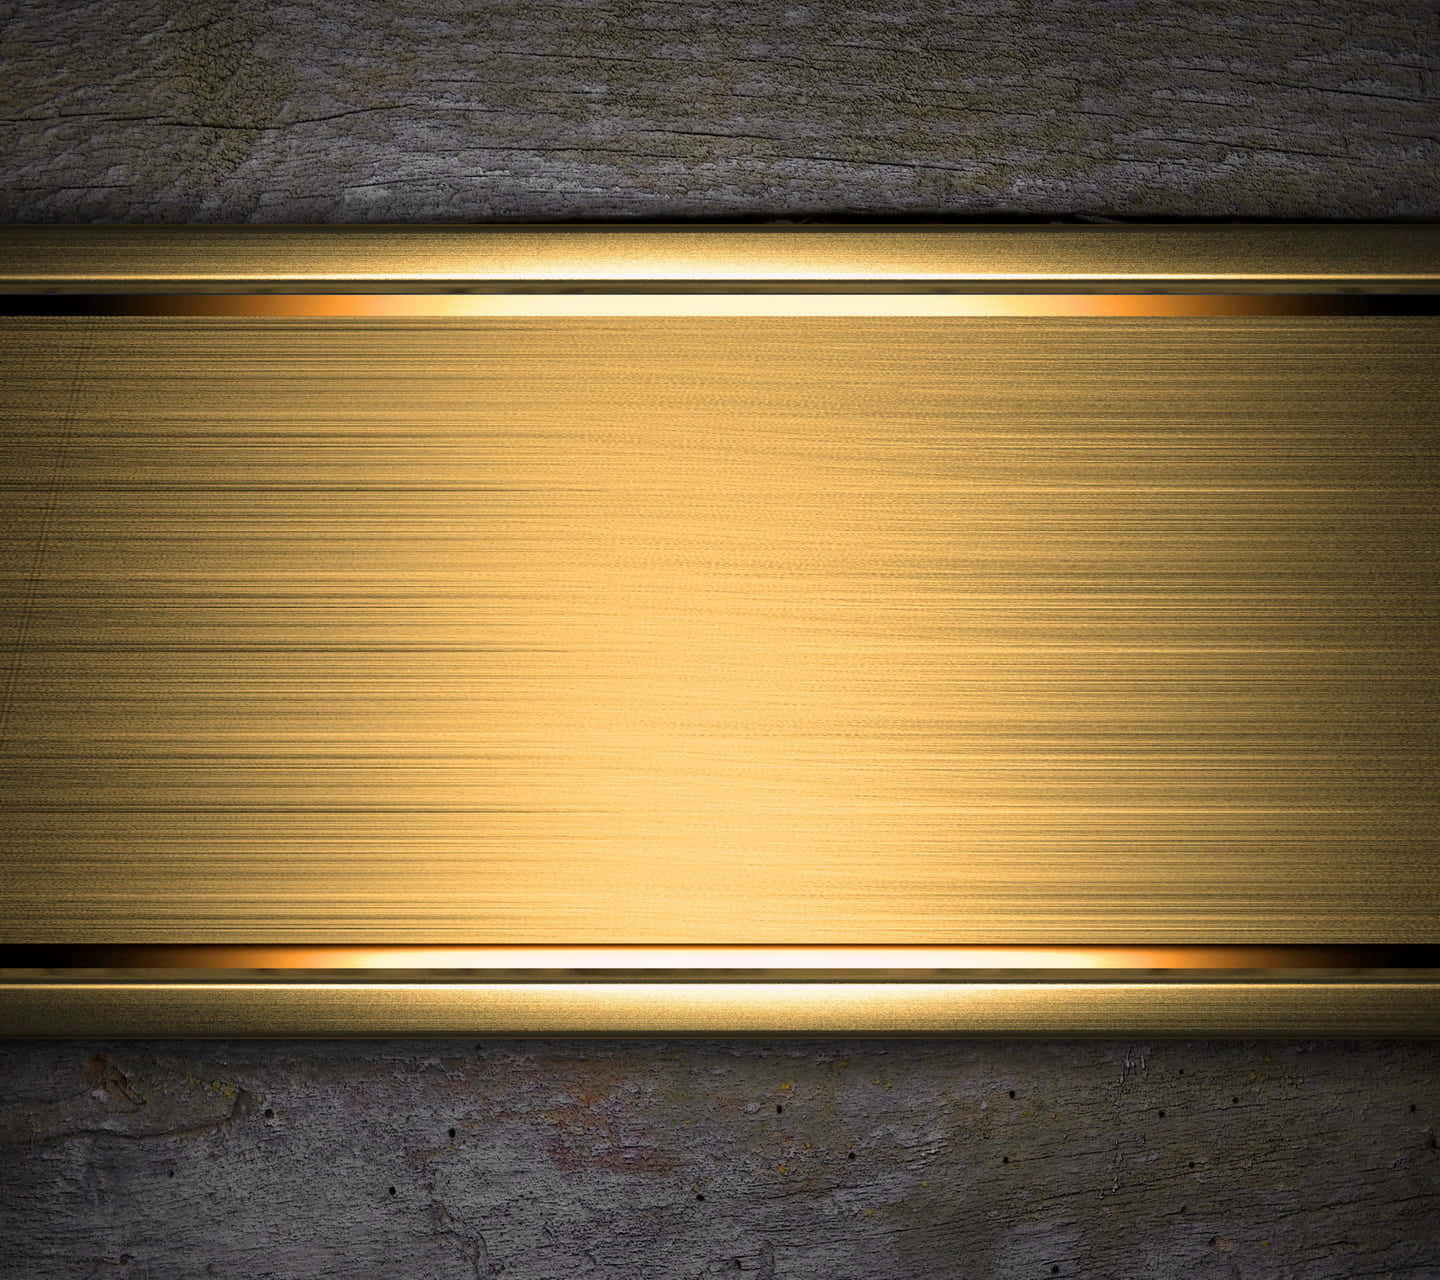 Gold Metal Plate On A Wooden Background